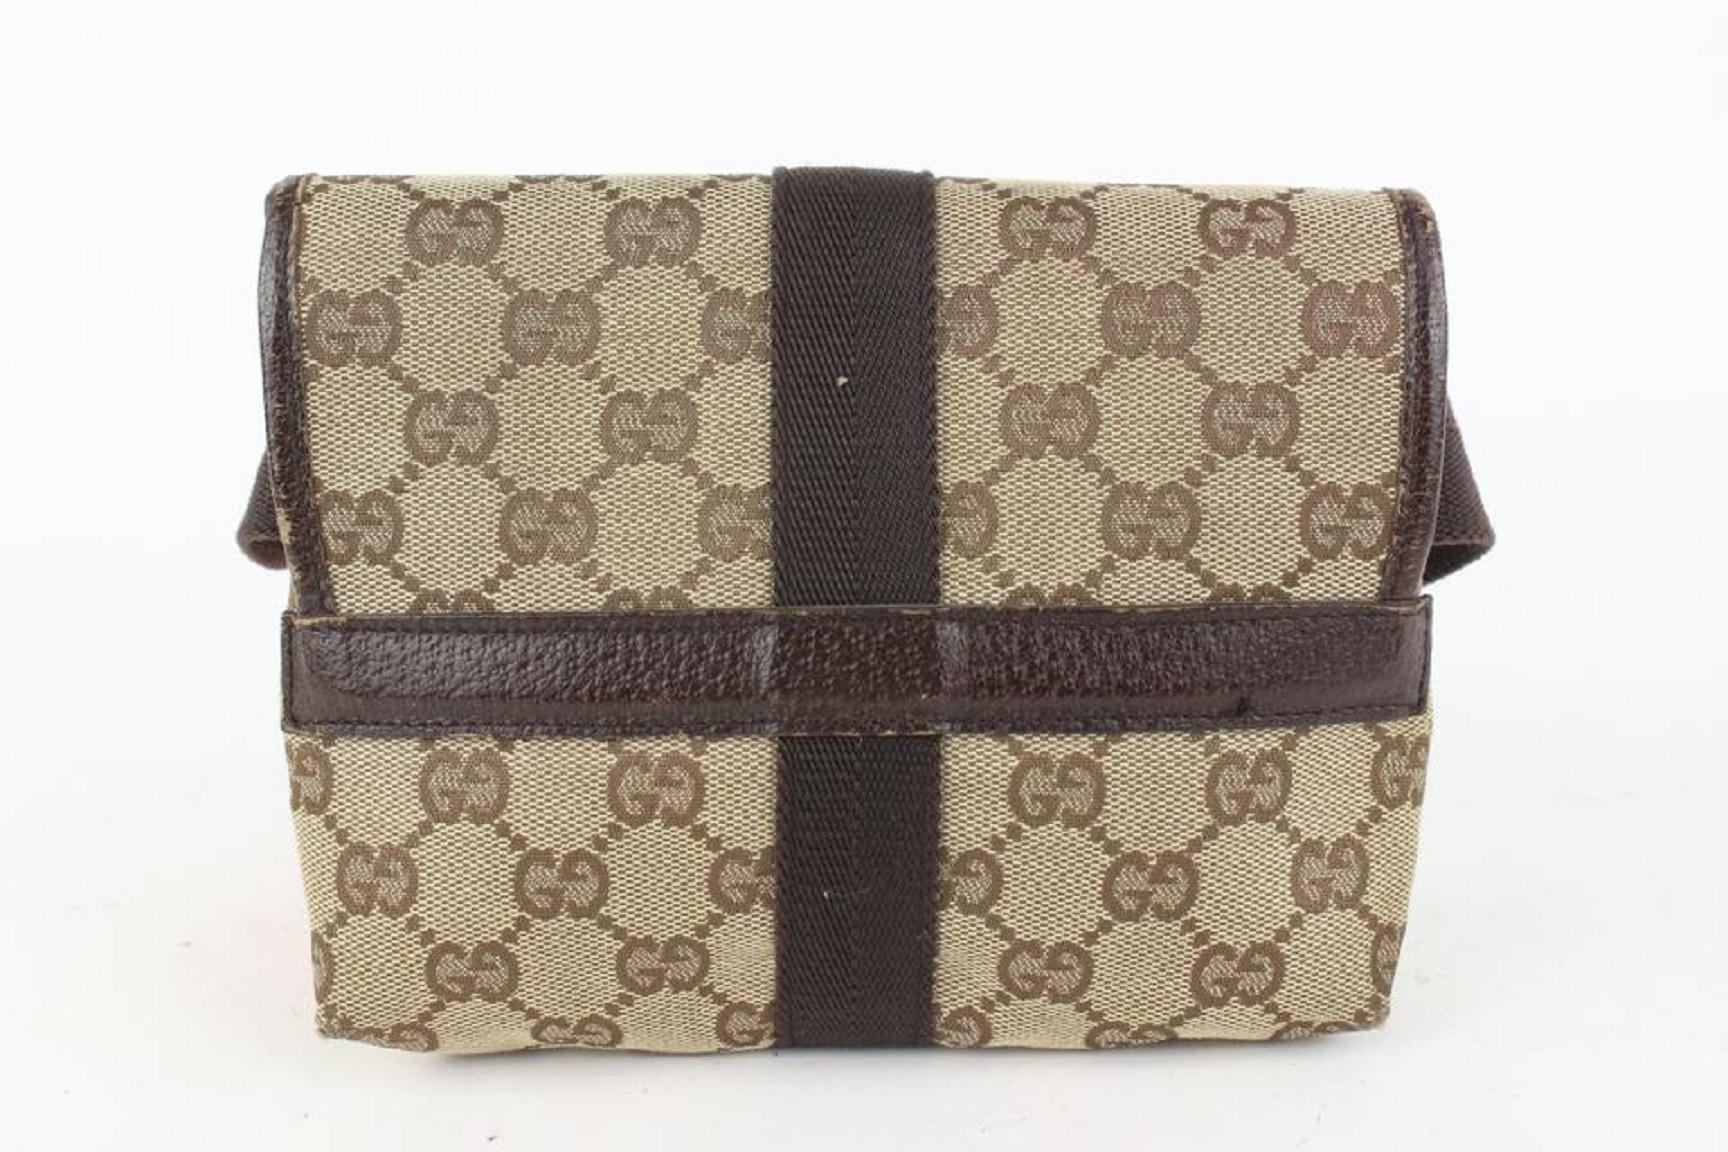 Gucci Monogram GG Belt Pouch Fanny Pack Waist Bag 913gk20 In Good Condition For Sale In Dix hills, NY